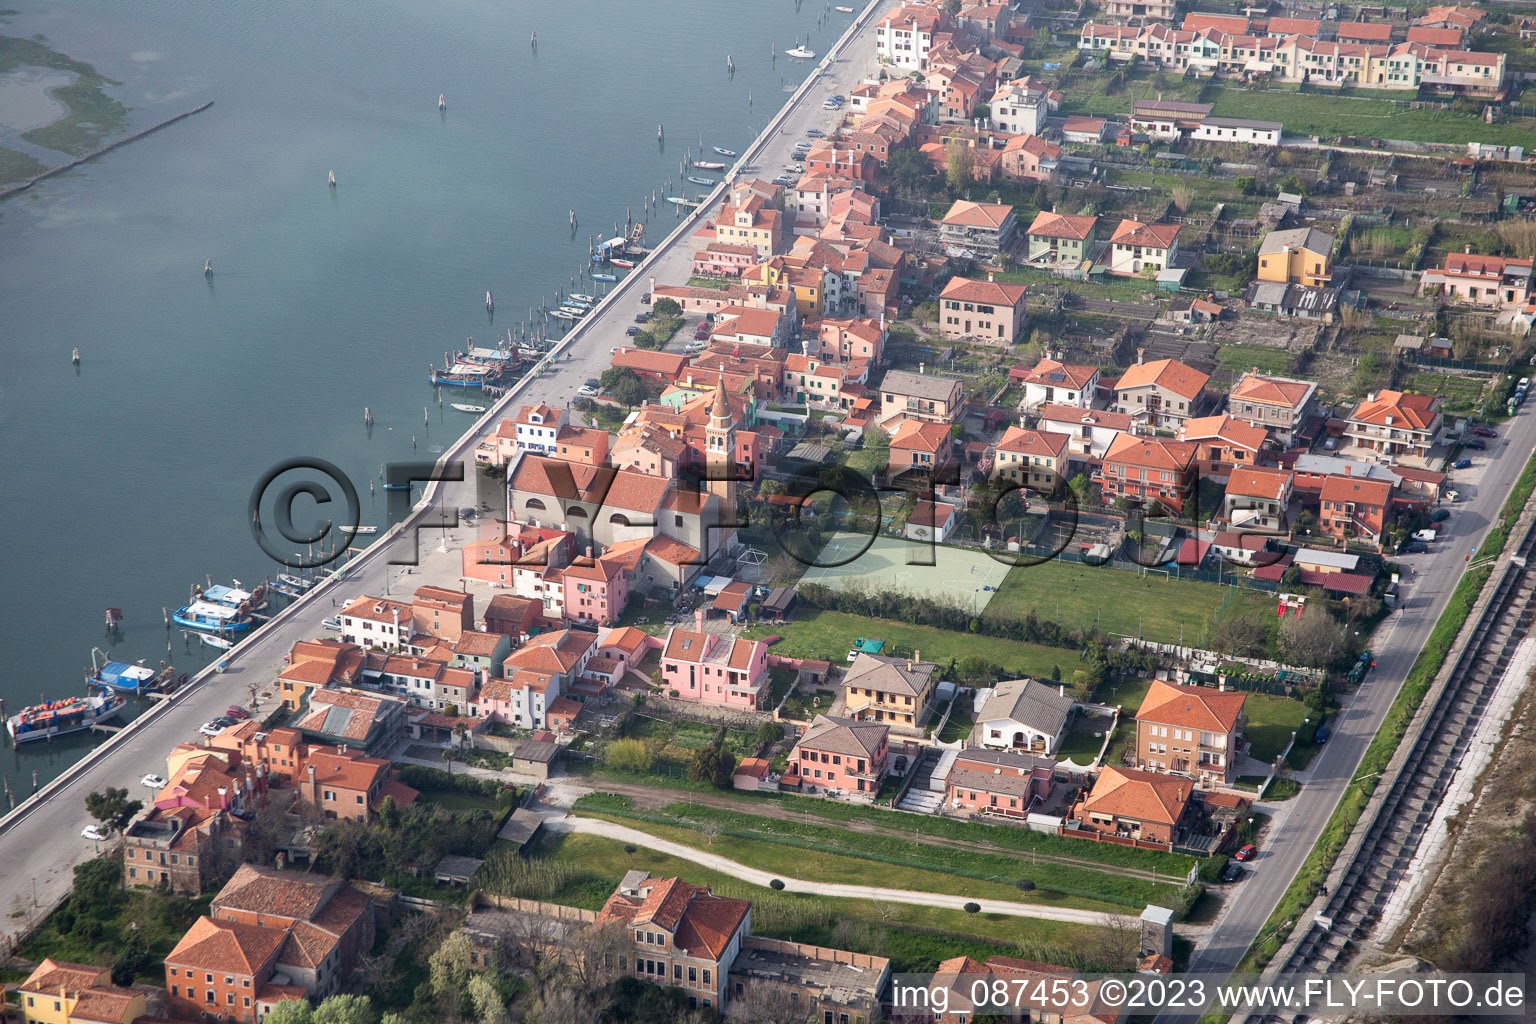 Aerial view of Townscape on the seacoast of Mediterranean Sea in San Vito in Veneto, Italy